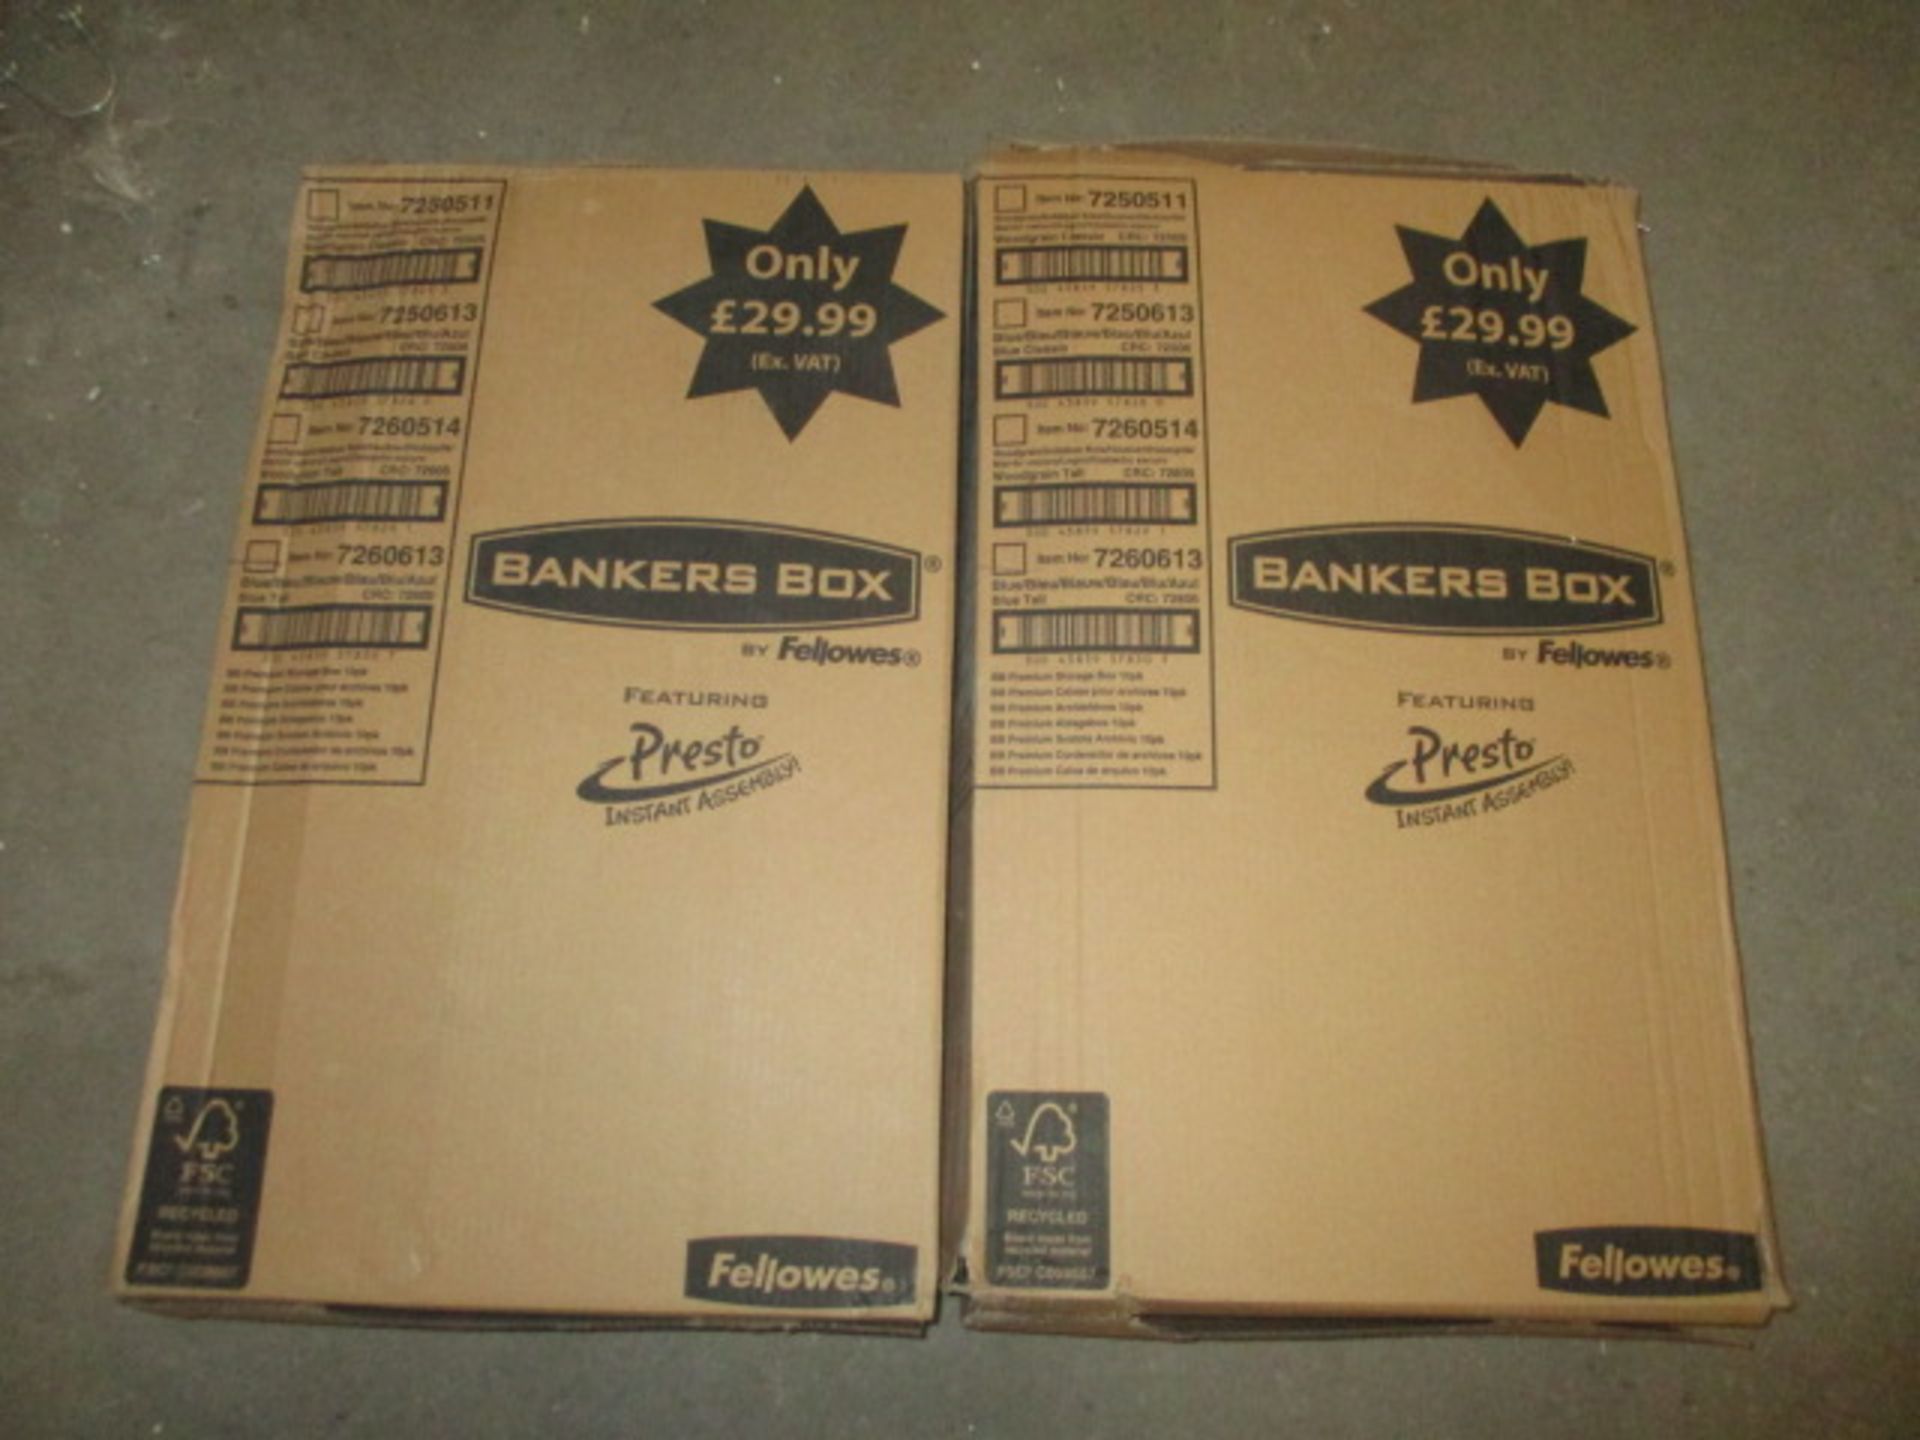 2 x Boxes of Premium Storage Bankers Boxes - 20 Boxes in Total, RRP £35.98 Per Box - Image 4 of 4